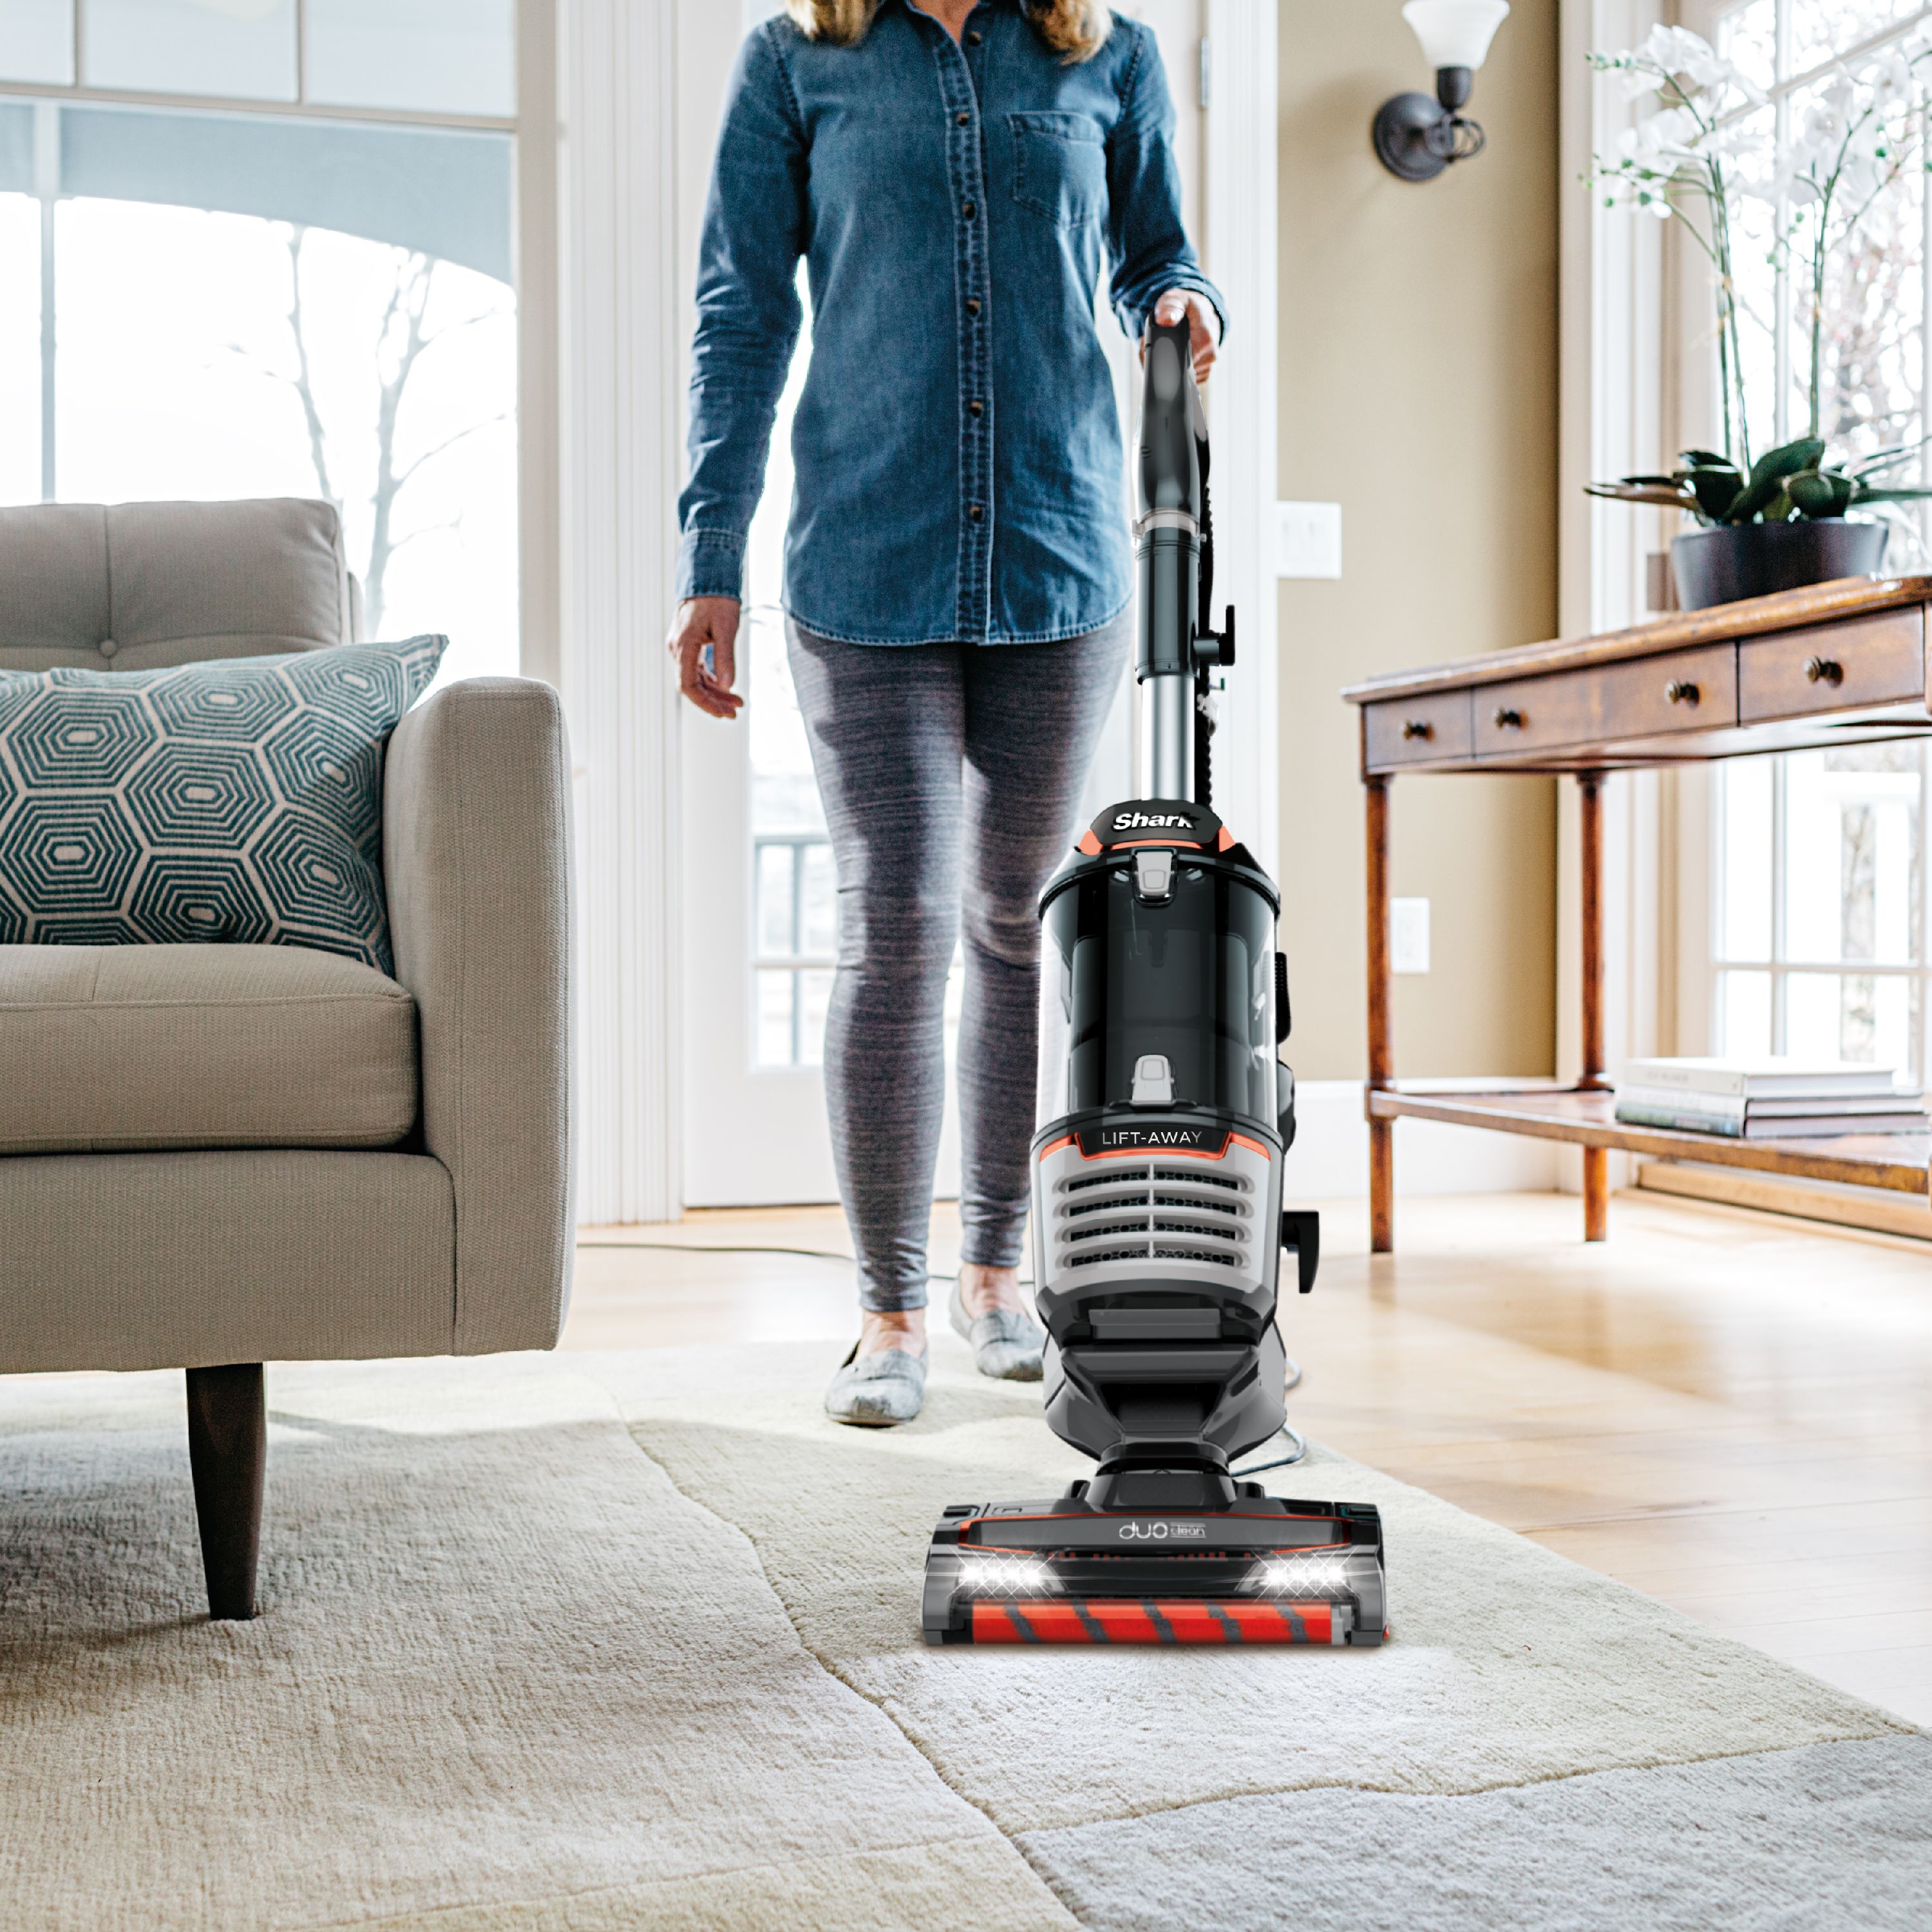 Shark DuoClean Lift-Away Speed Upright Vacuum NV770 - image 3 of 5